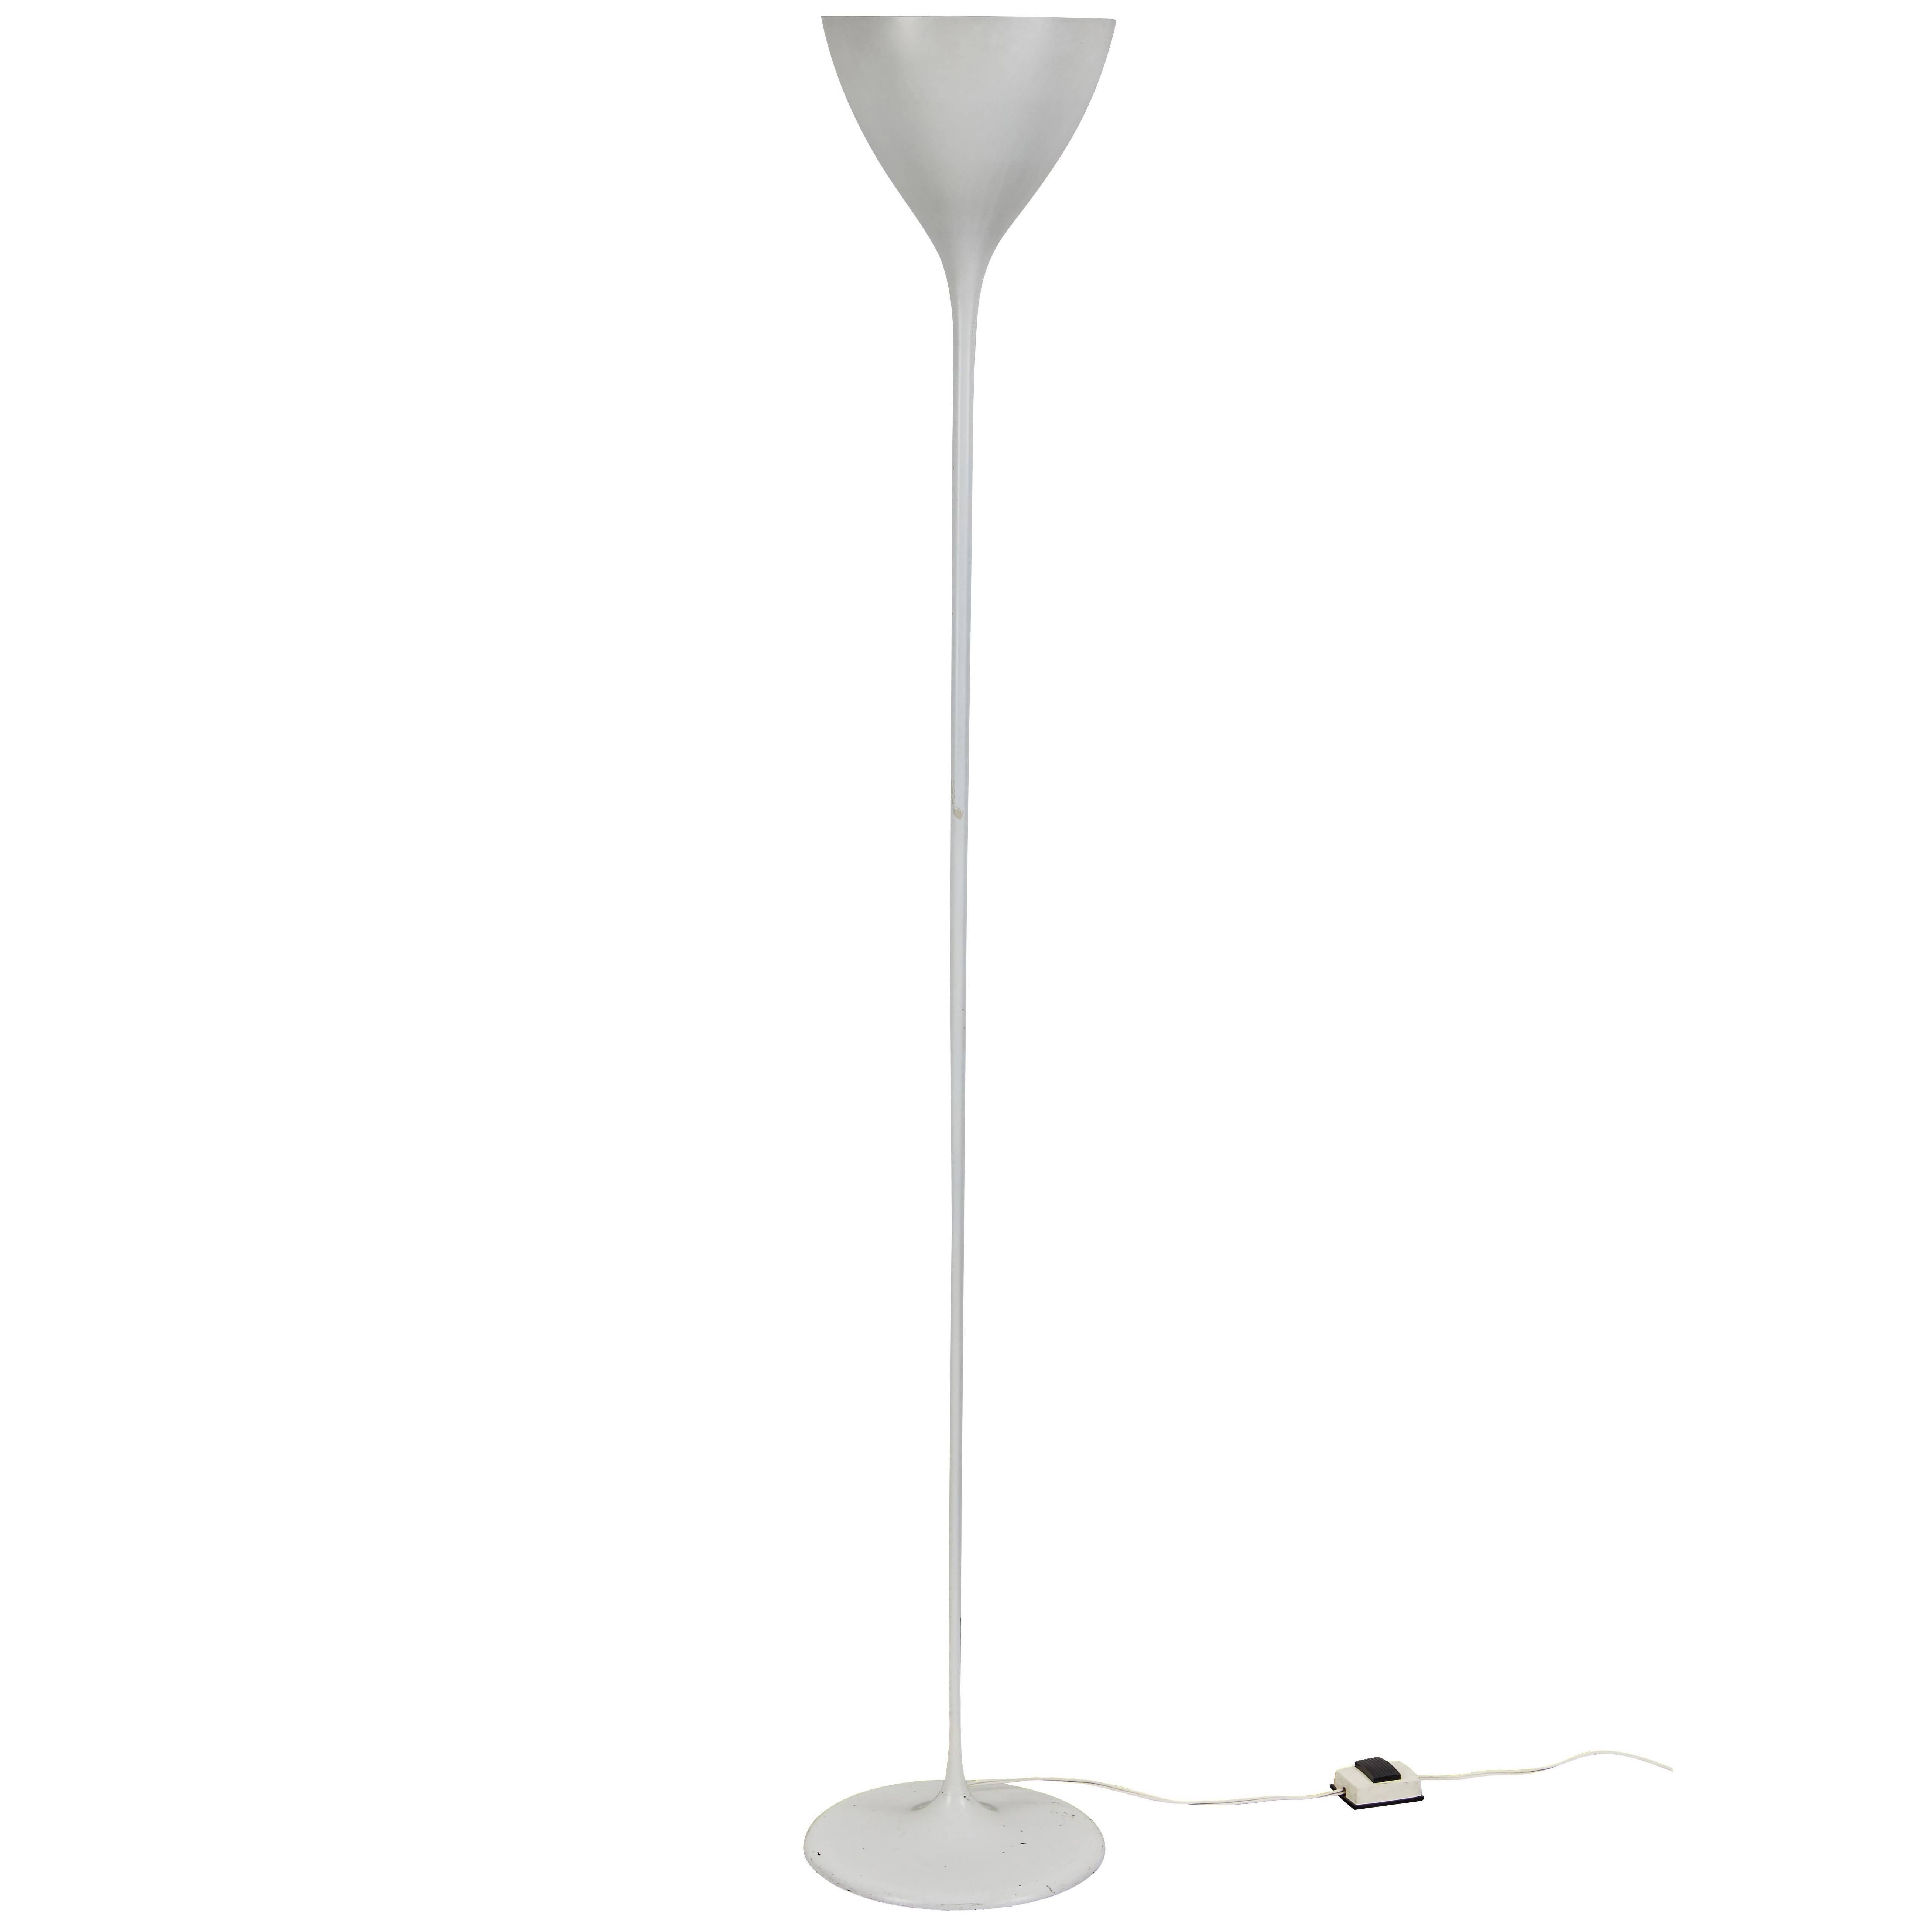 Swiss Torchiere Floor Lamp by Max Bill